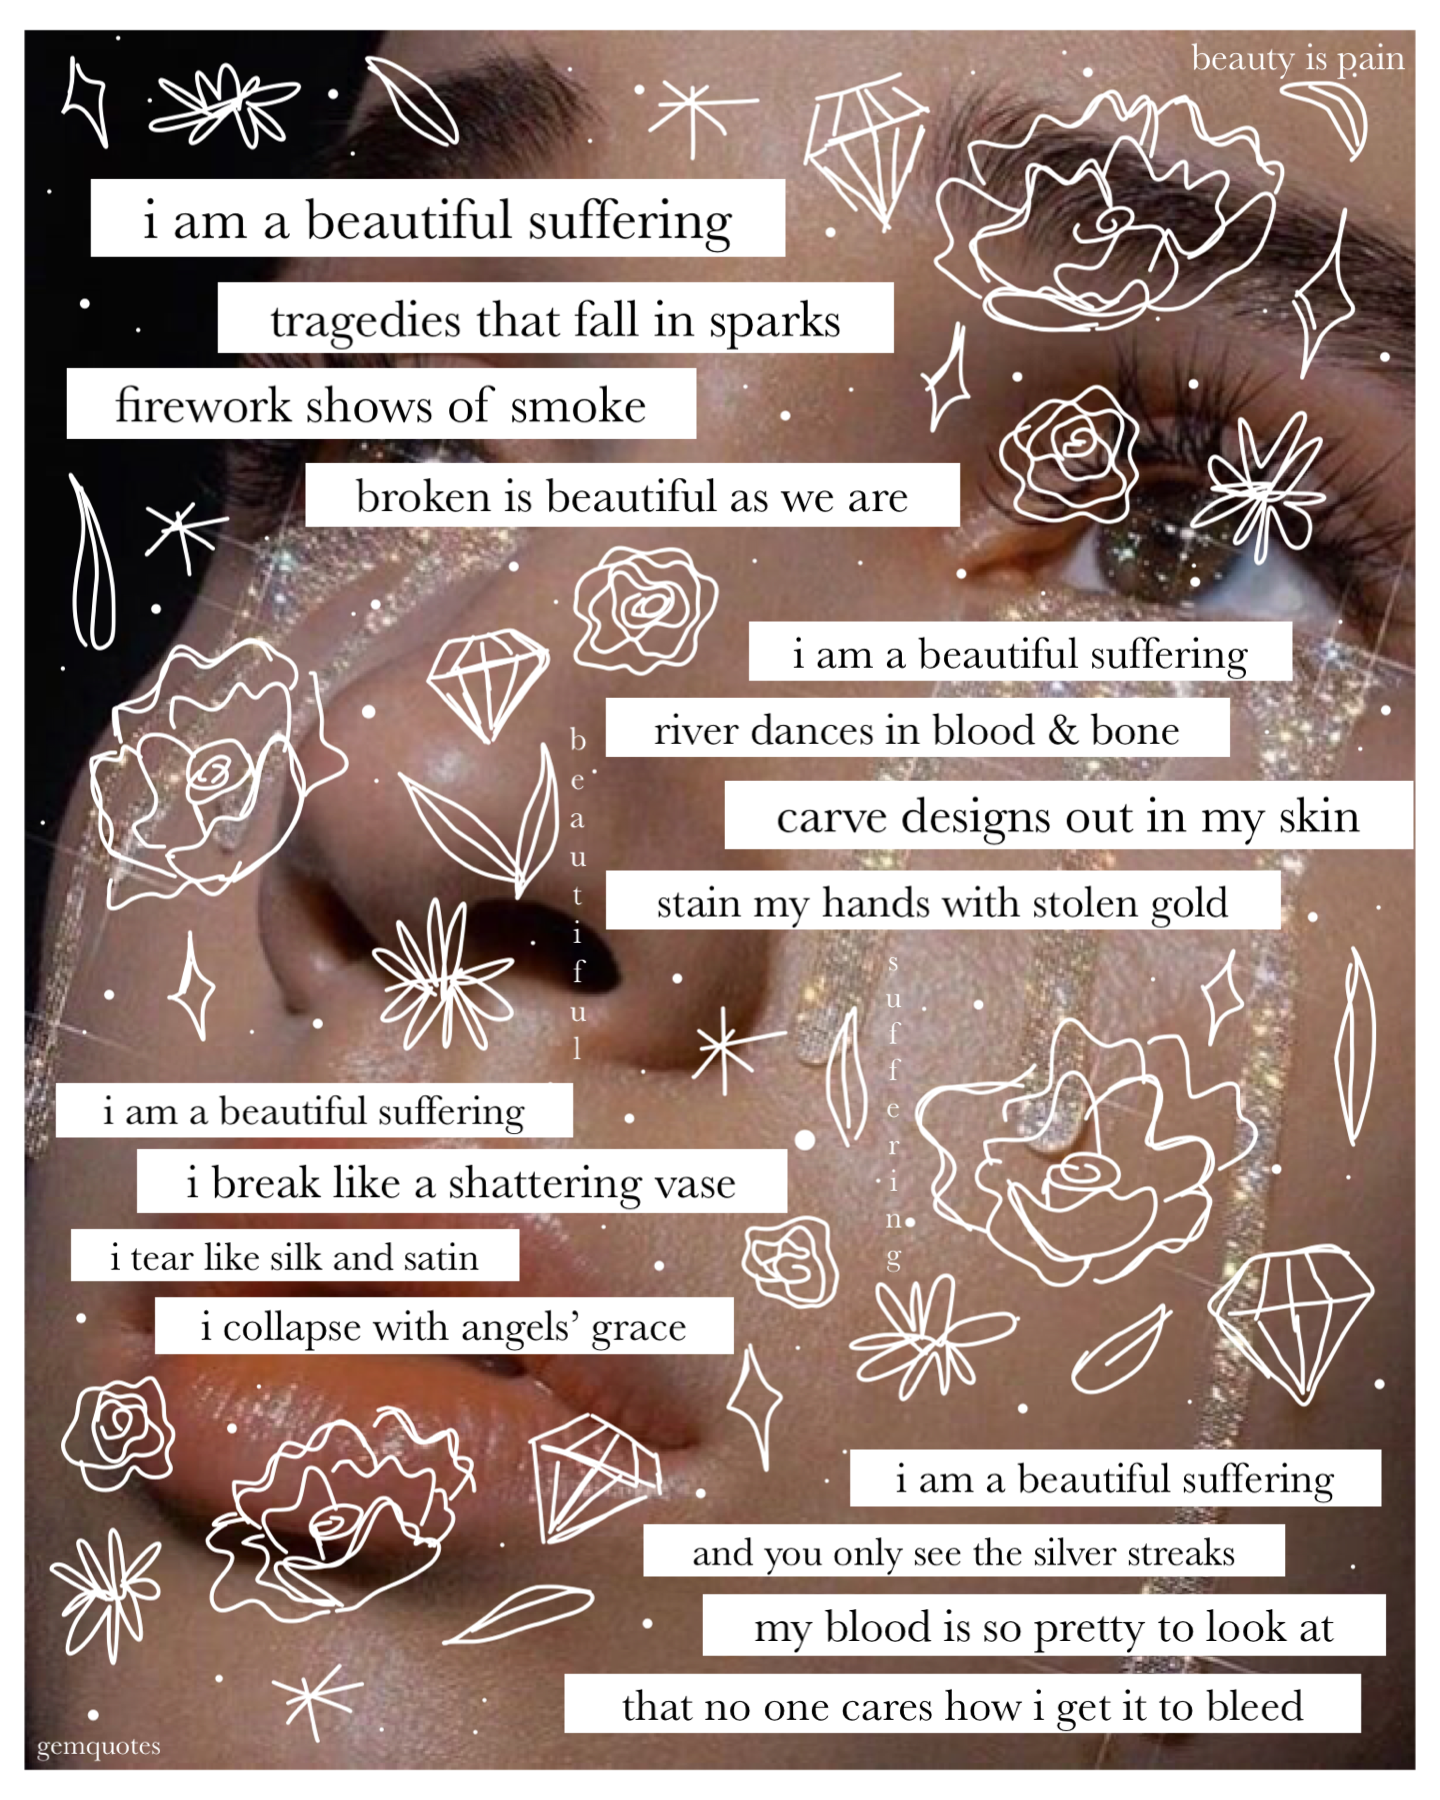 “⭐️tap💎”
Poem by me :) gonna be posting two more of these today because i need to do some more posting and I’m hoping to bring u all an ineffable thoughts soon since it’s been so long😅 what do u think of the poem?meaning? Sending love~~💕💕